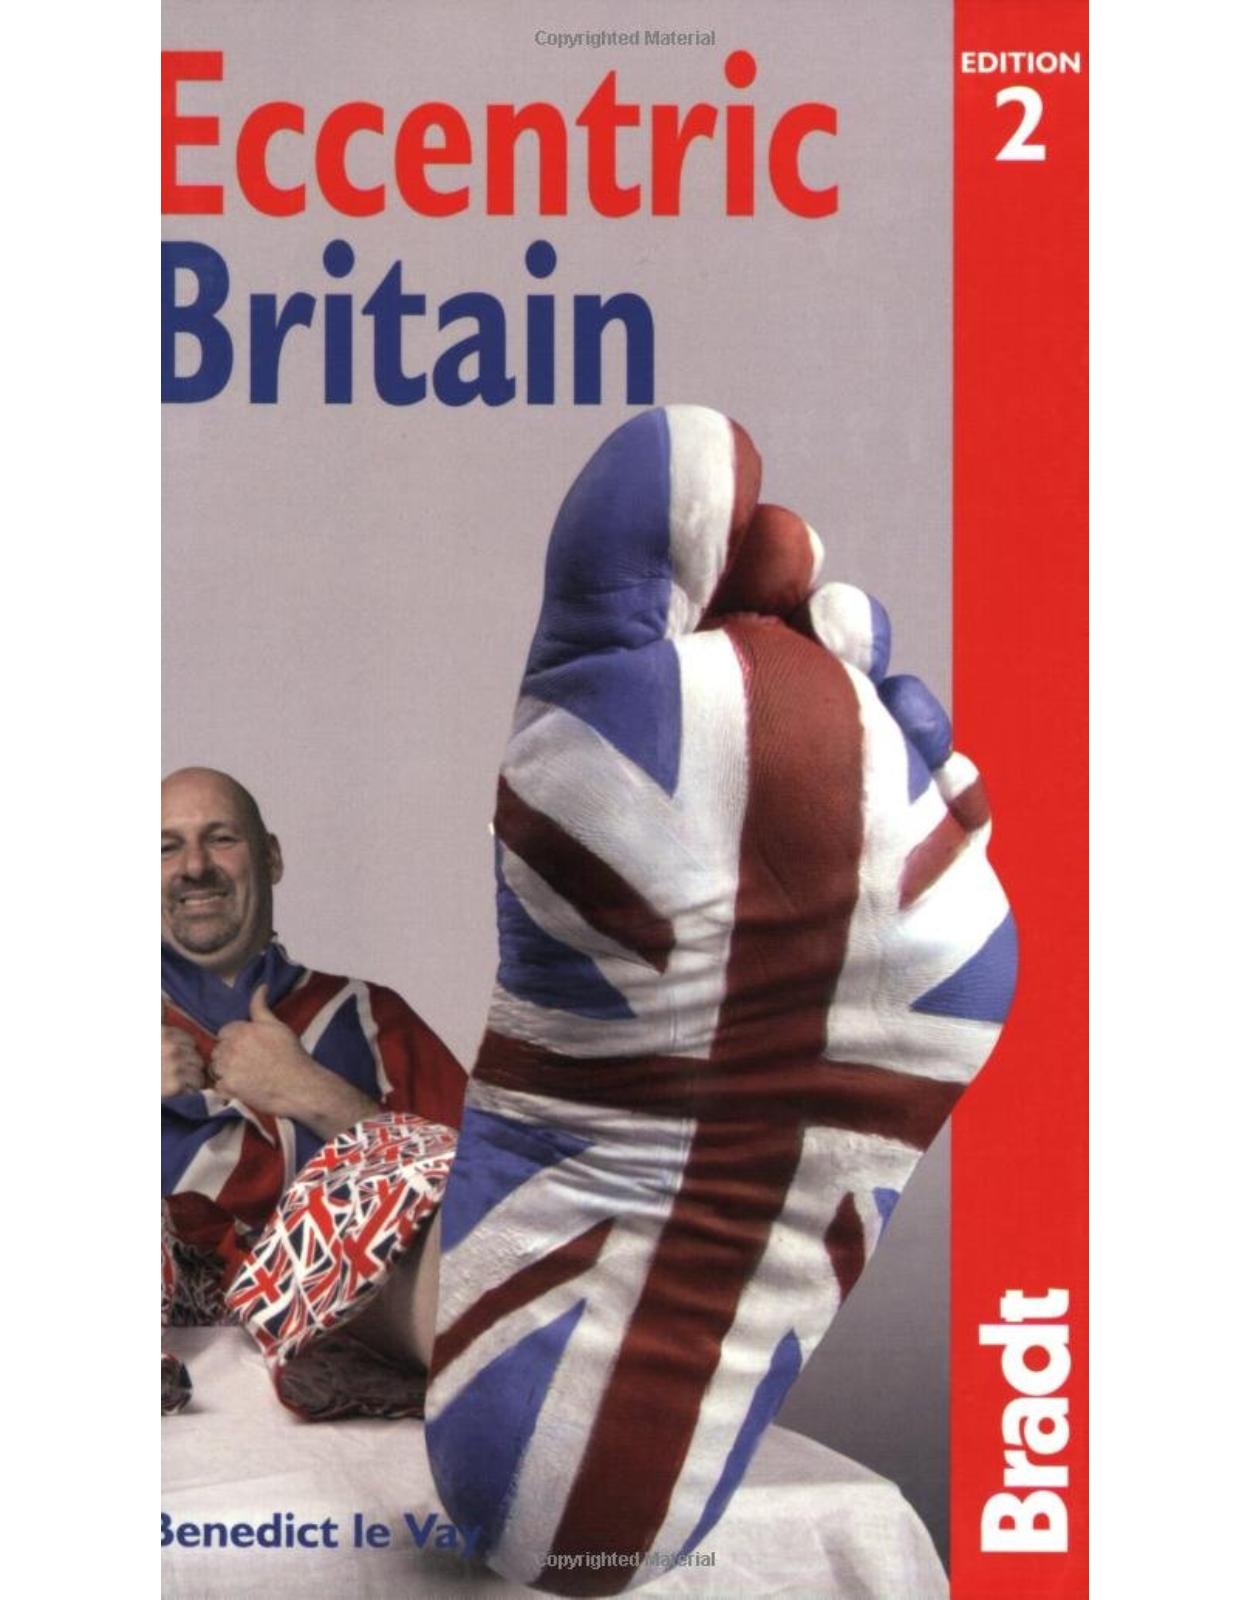 Eccentric Britain: The Bradt Guide to Britain's Follies and Foibles